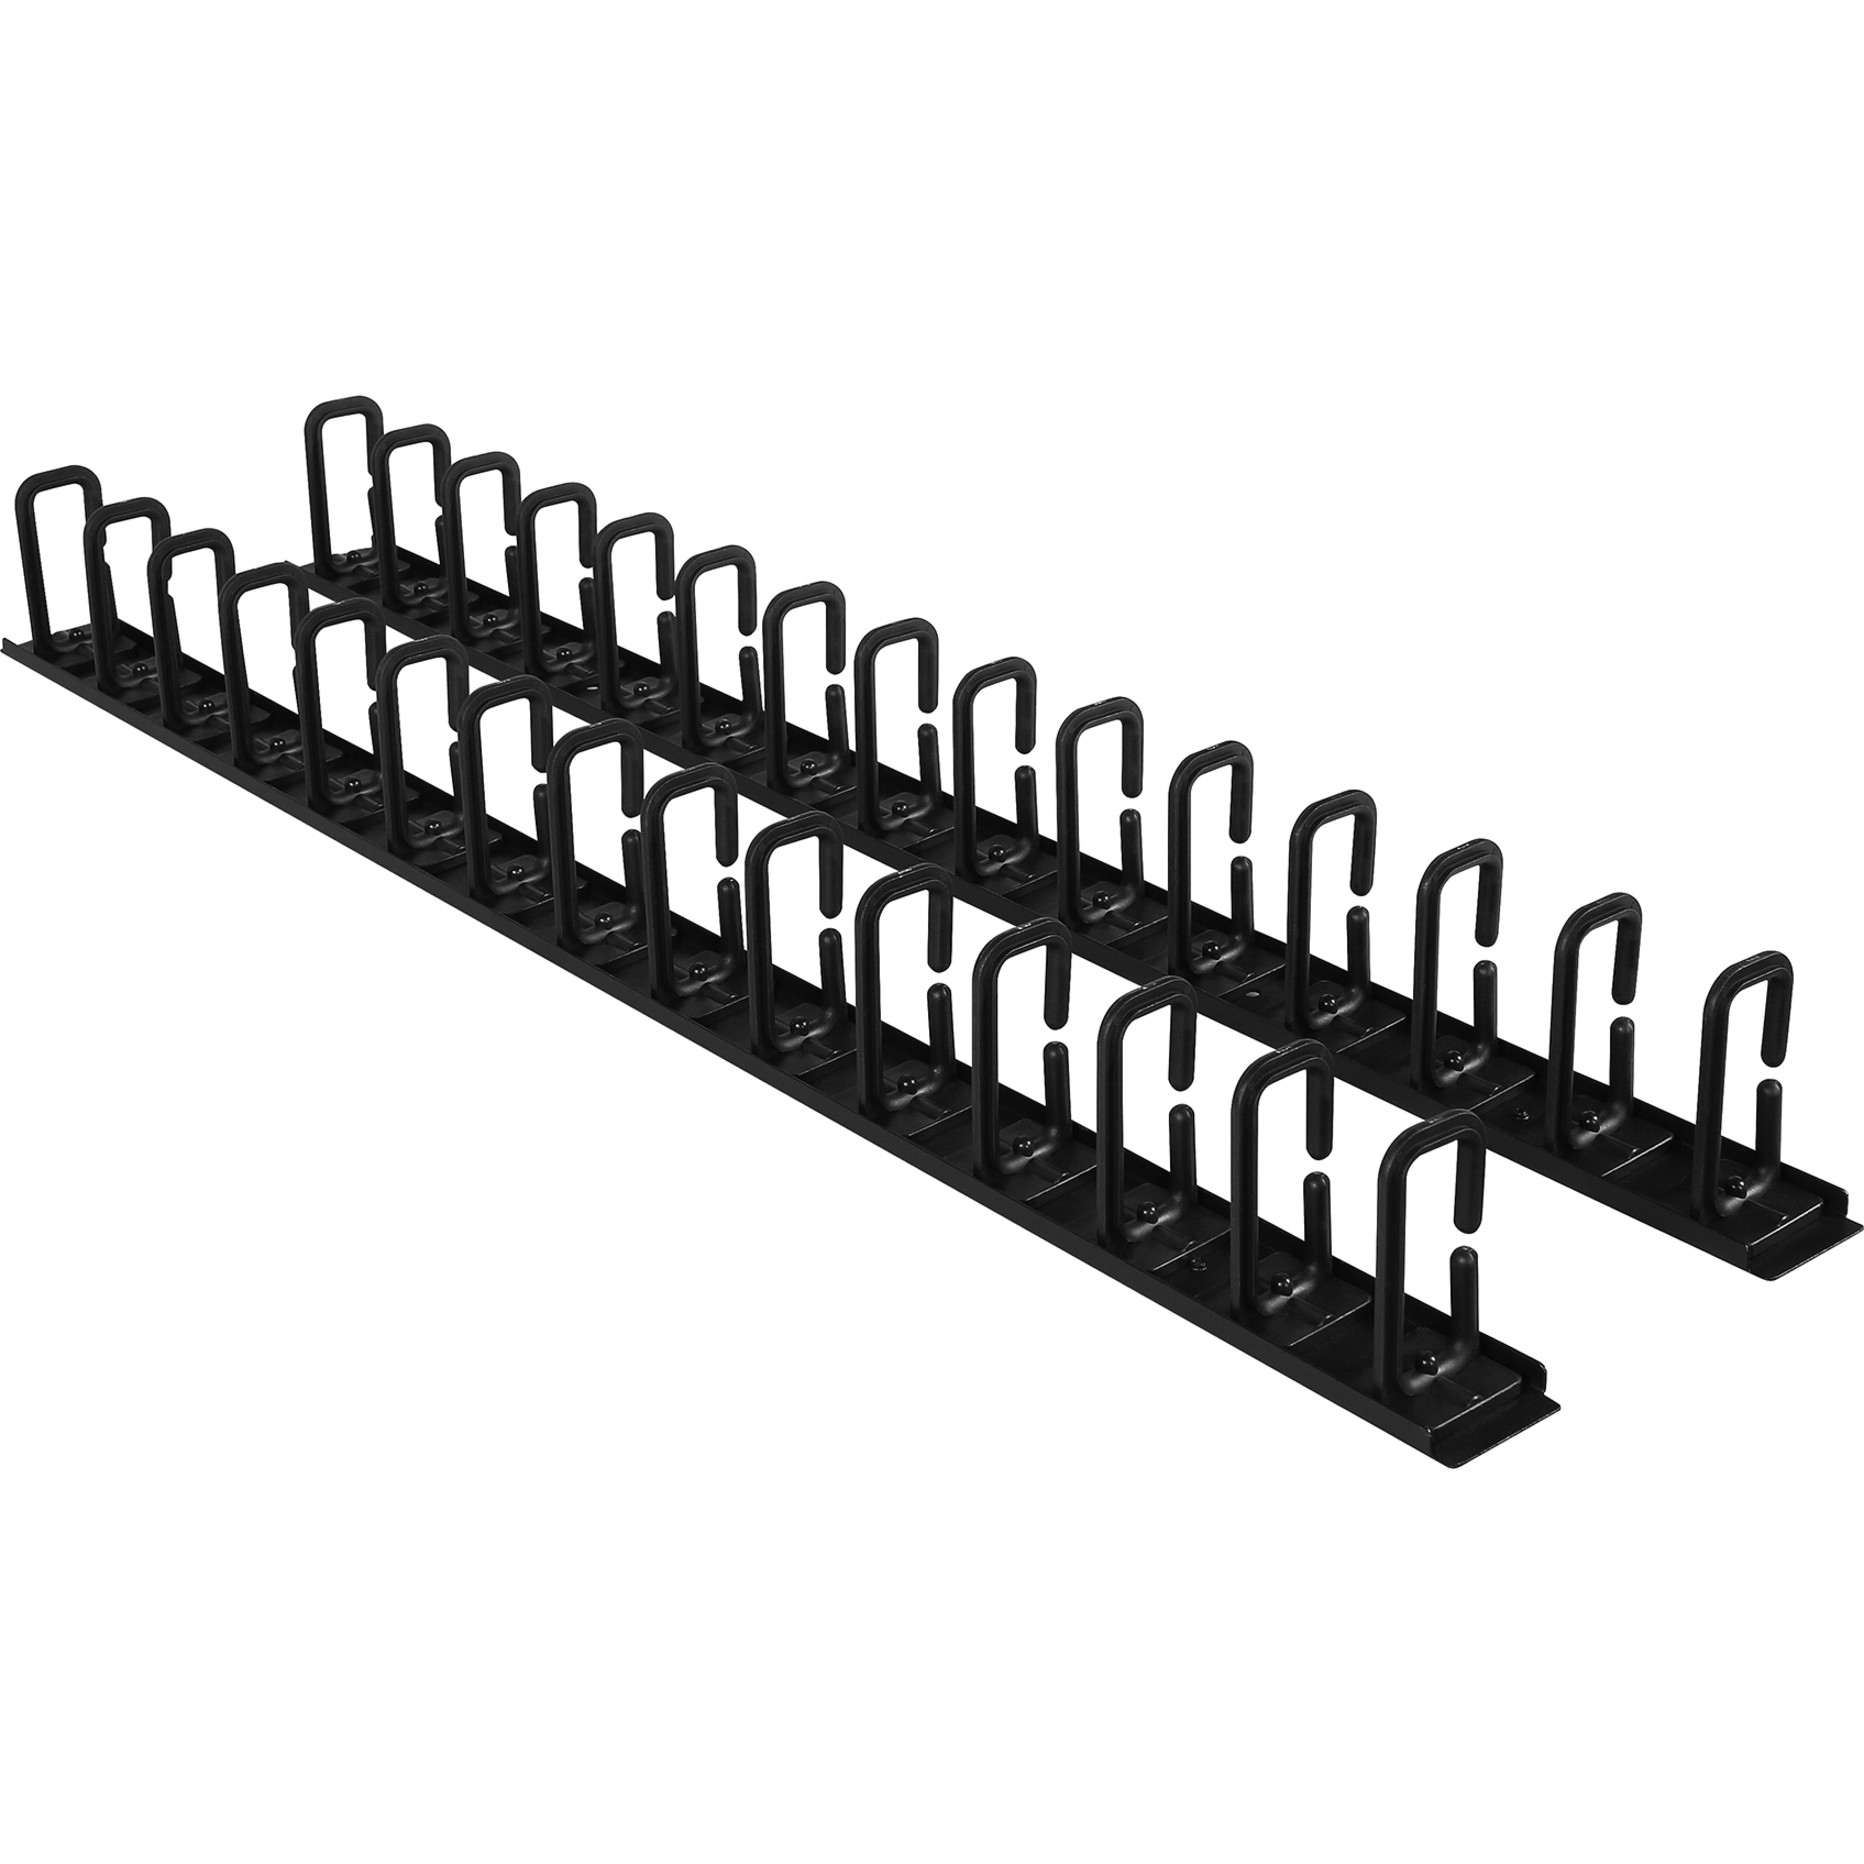 Cyber Power CRA30007 Cable manager Rack AccessoriesVertical flexible ring cable manager, 6ft (1.8m), 2x 3ft (0.9m) sections, toolless mountin… CRA30007